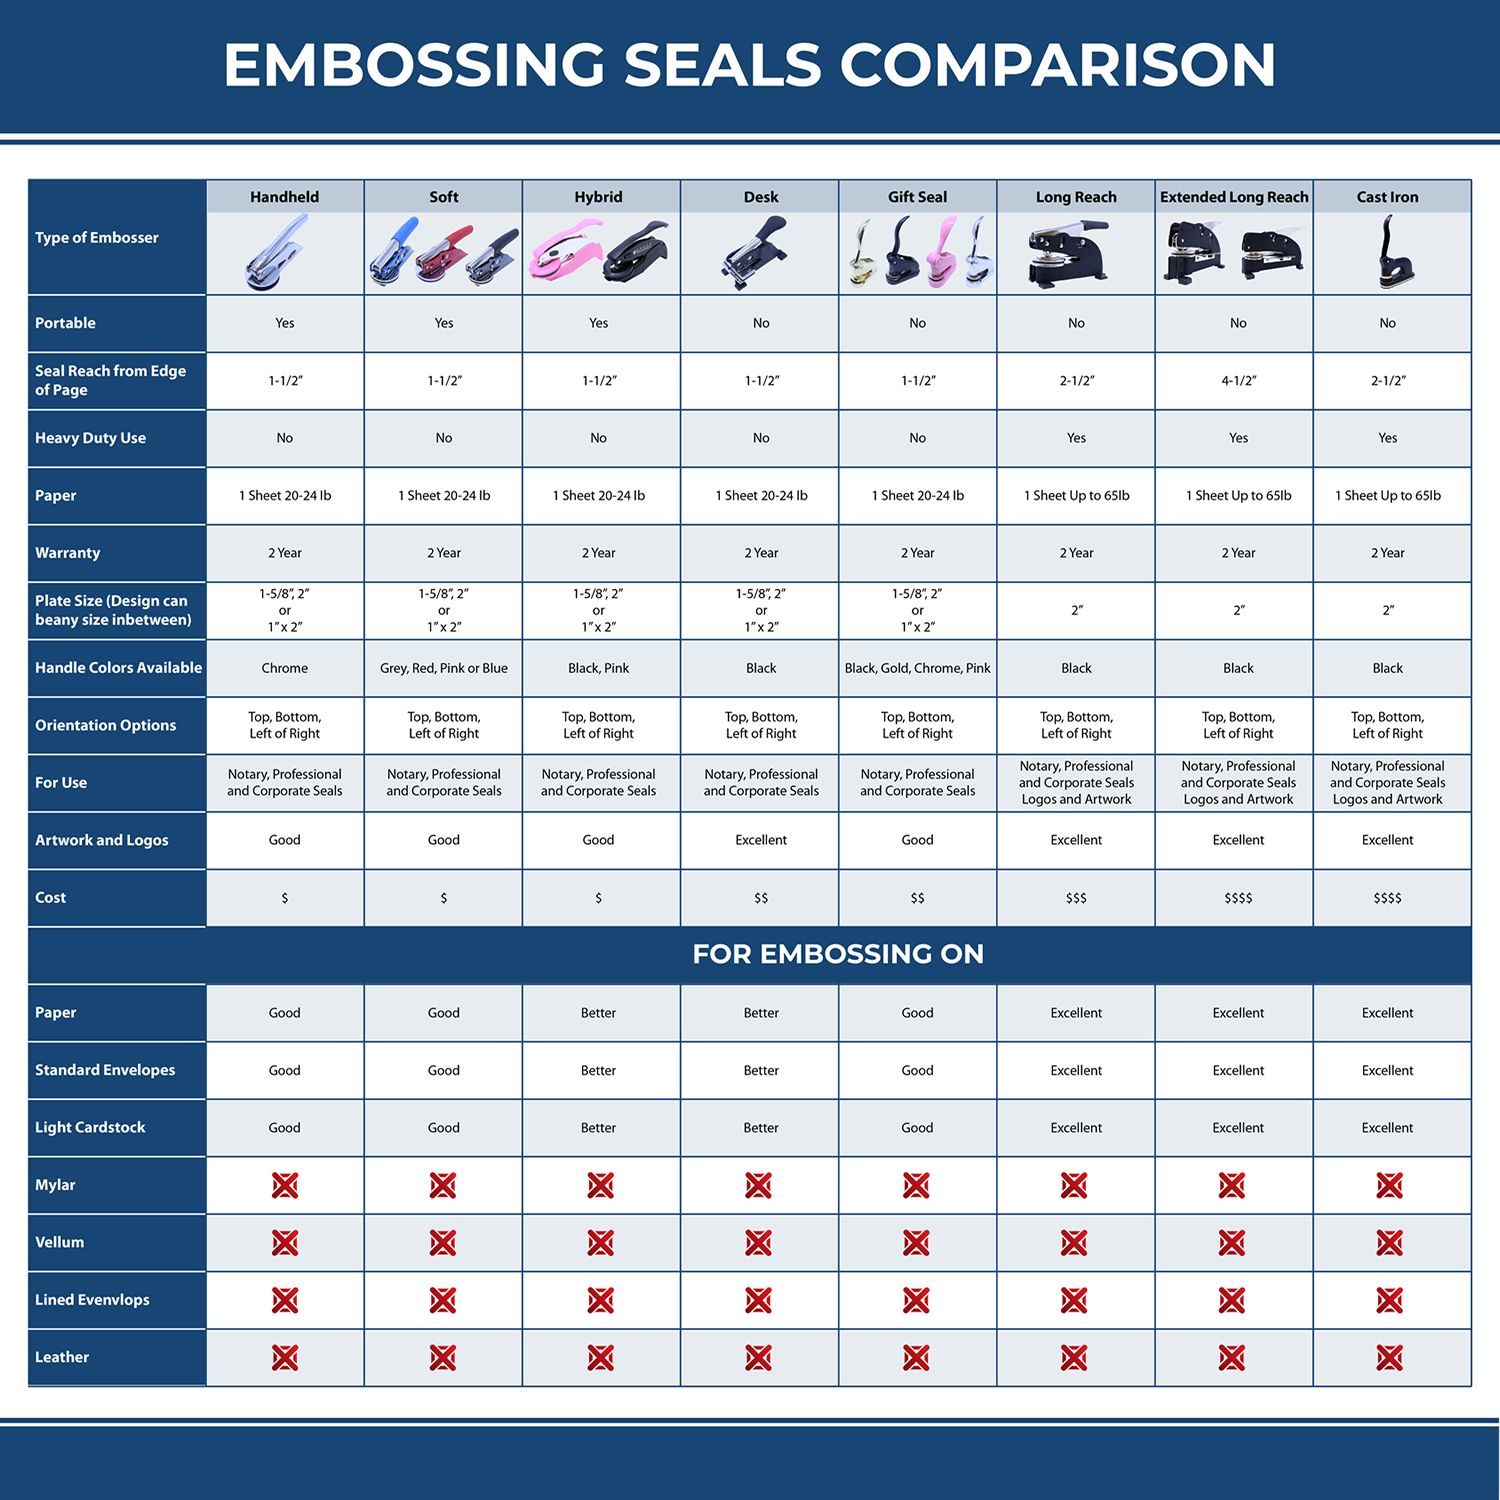 A comparison chart for the different types of mount models available for the State of Tennessee Extended Long Reach Landscape Architect Seal Embosser.